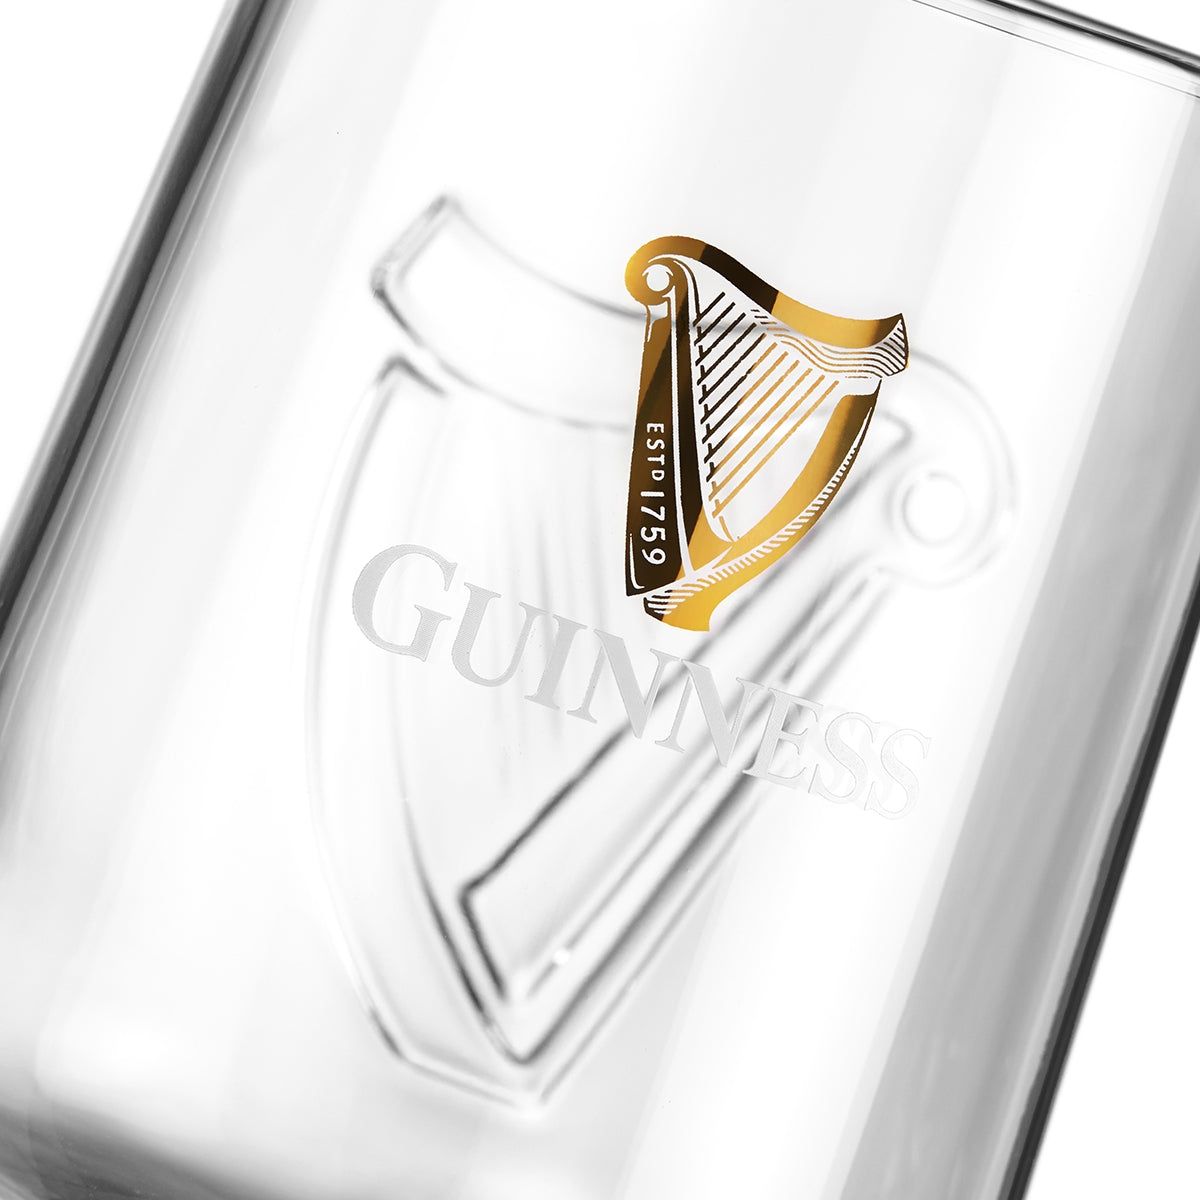 This Guinness Embossed Stem Glass is embossed with the iconic Guinness logo, making it a must-have for any Guinness fan.